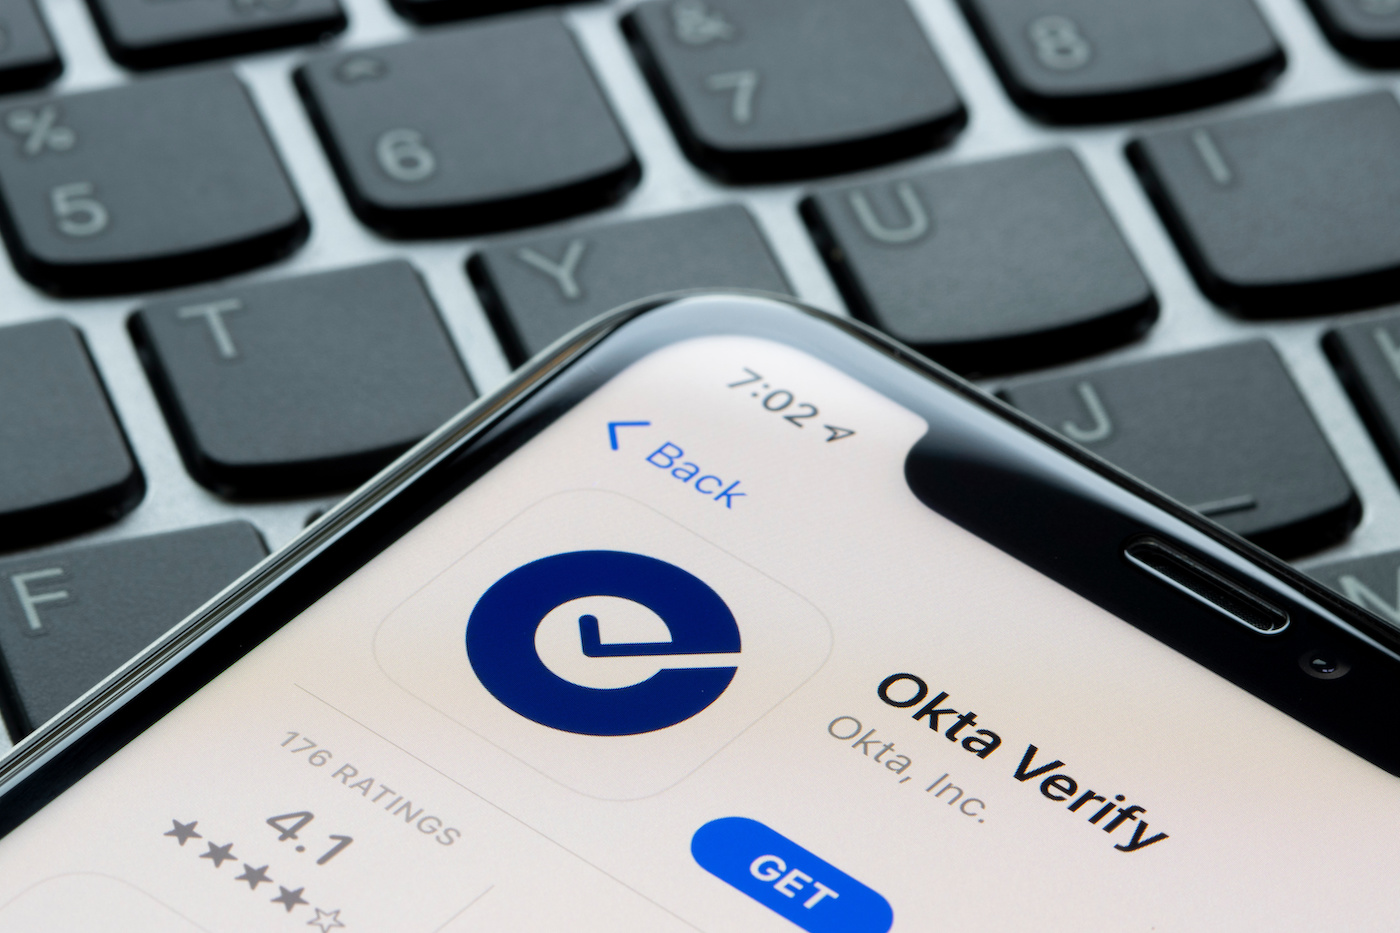 Okta moves passkeys to cloud, allowing multi-device authentication